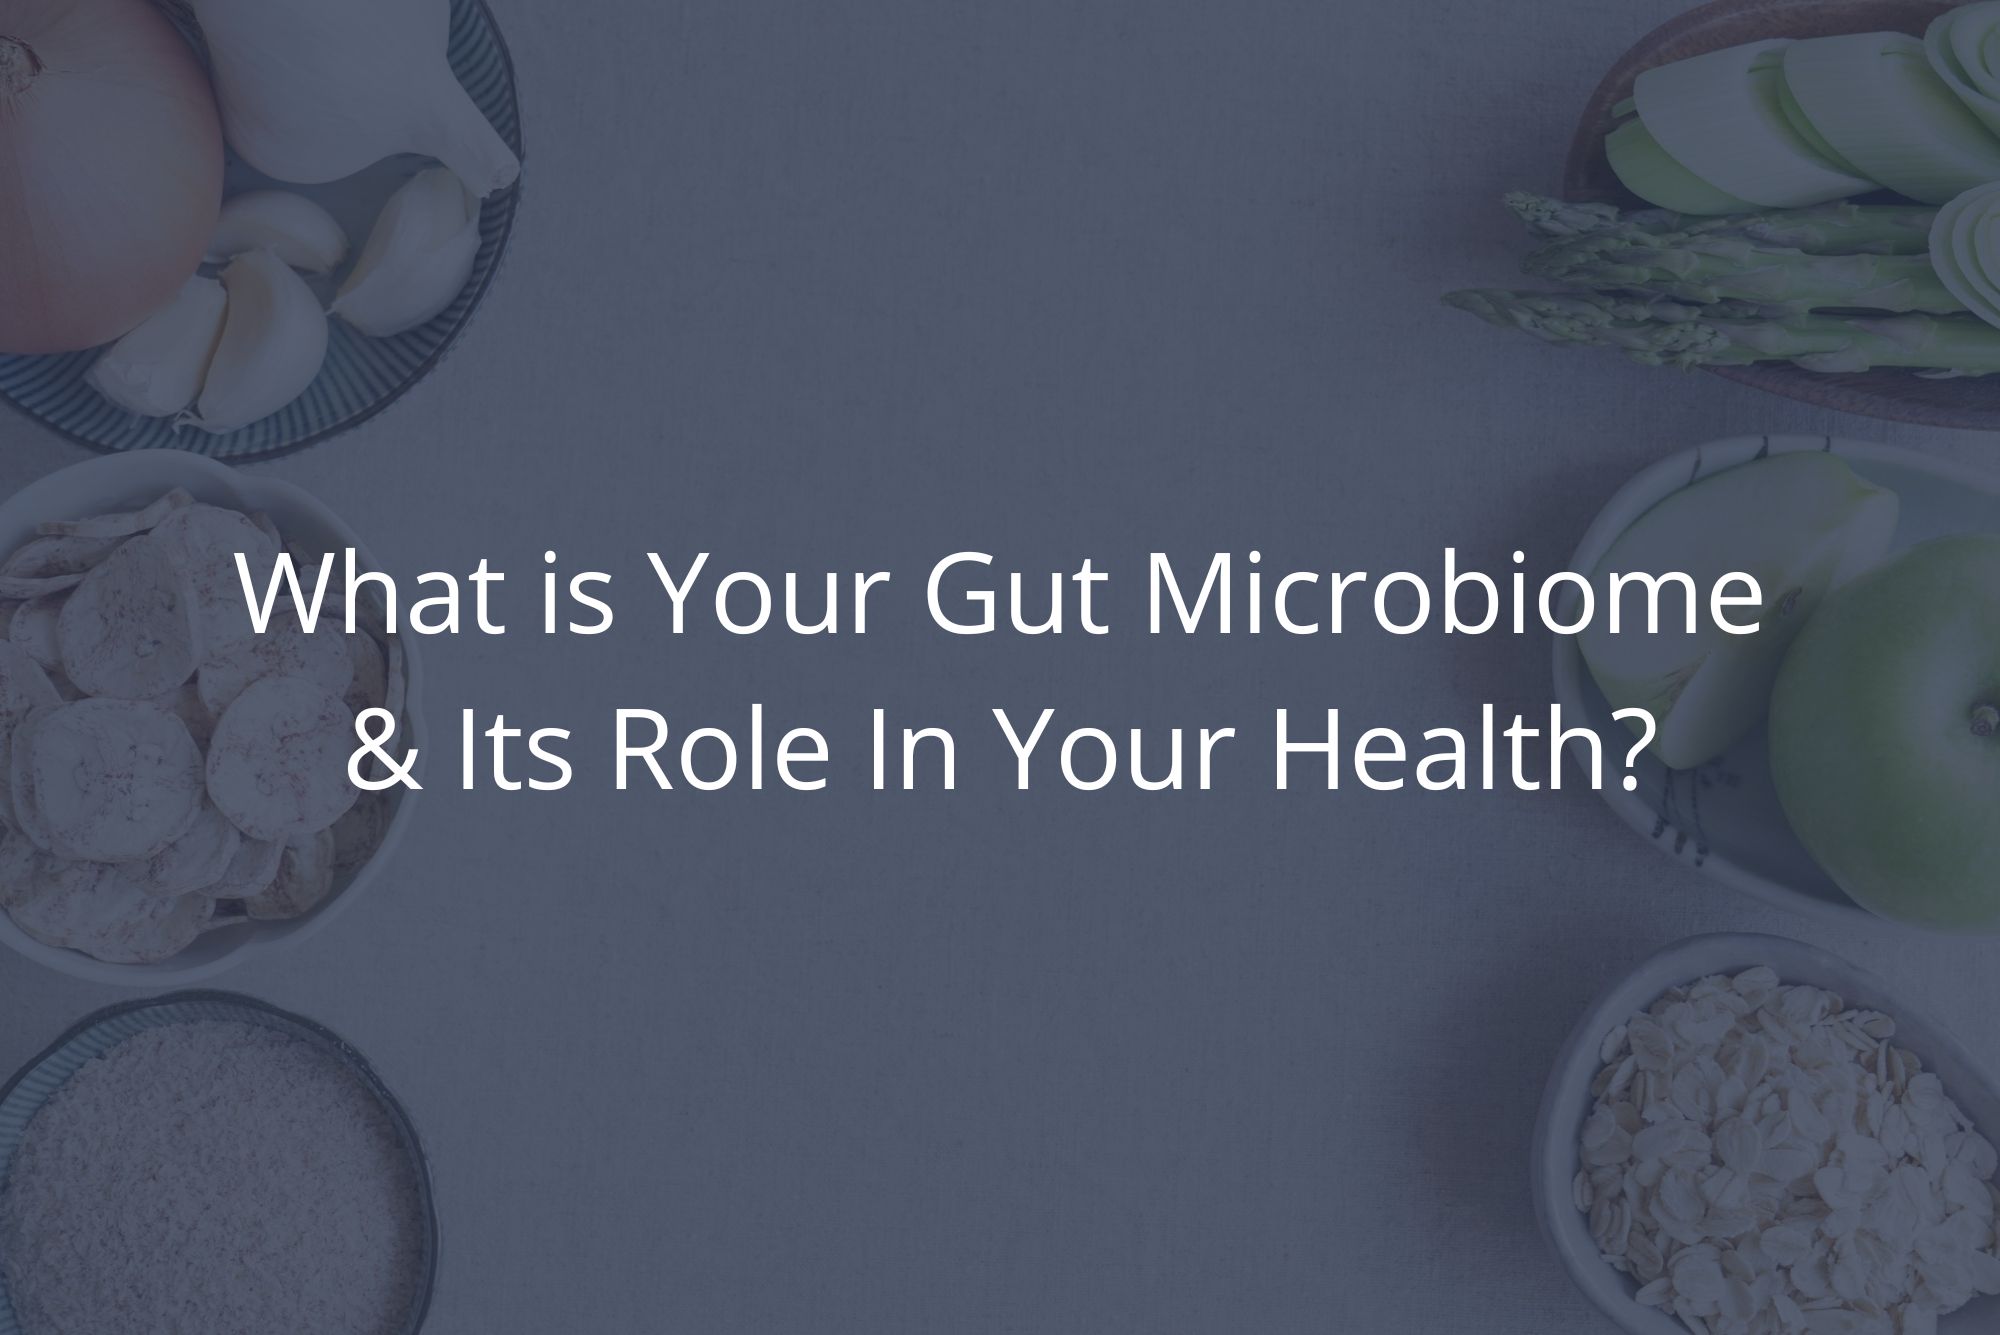 Food helpful for your human microbiome is spread out on a white table in various bowls.